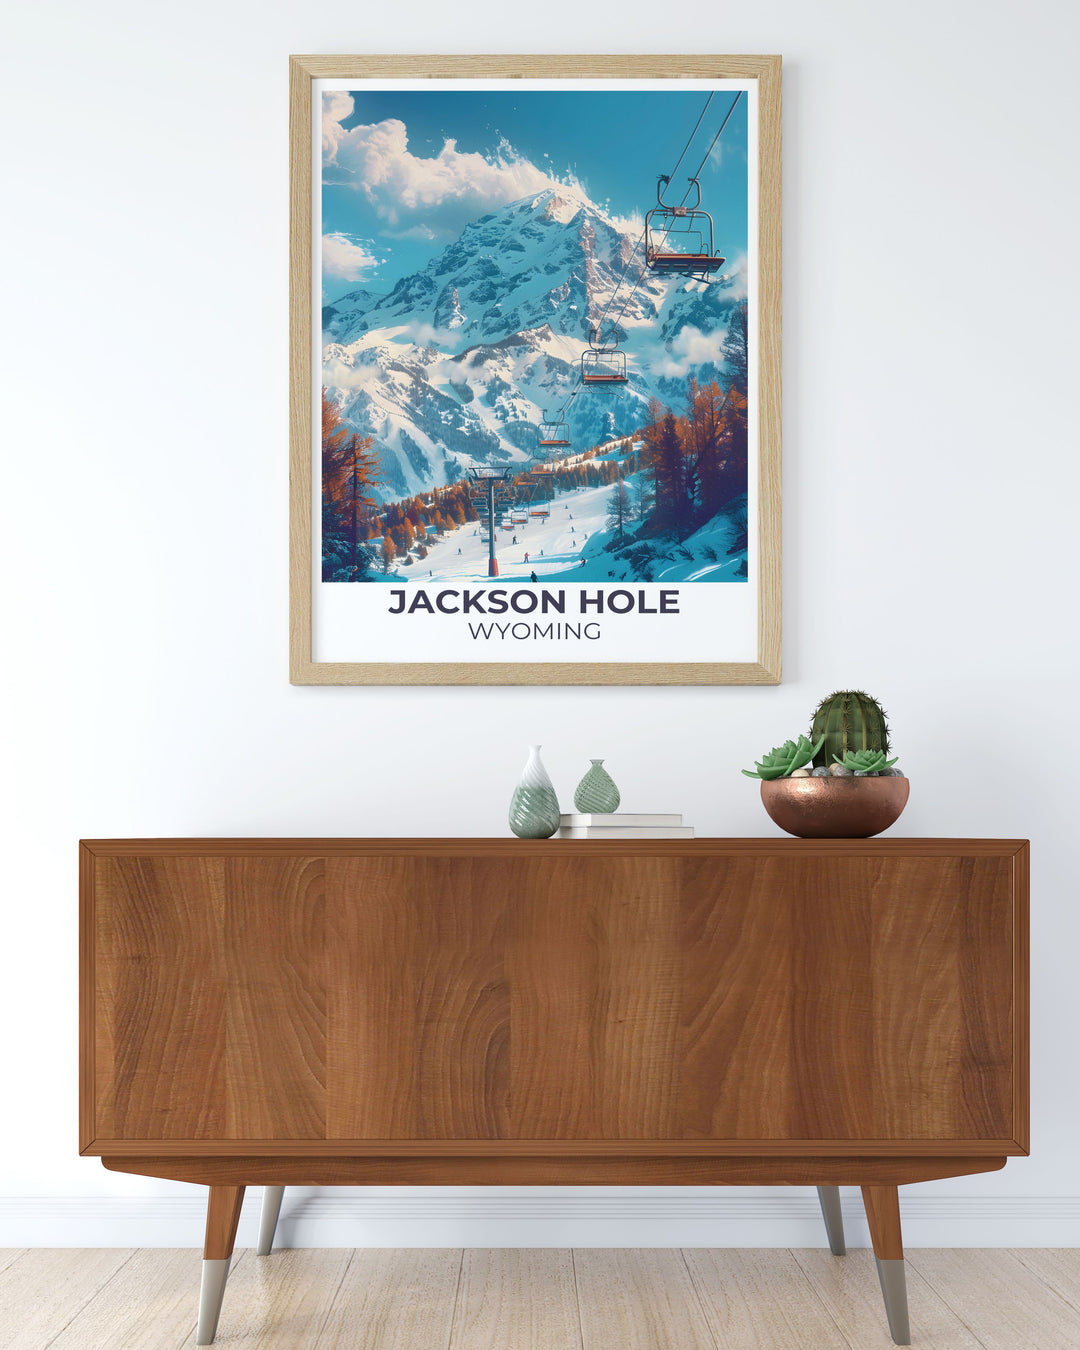 Art piece depicting the vibrant autumn colors of Jackson Hole suitable for bringing warmth to any room